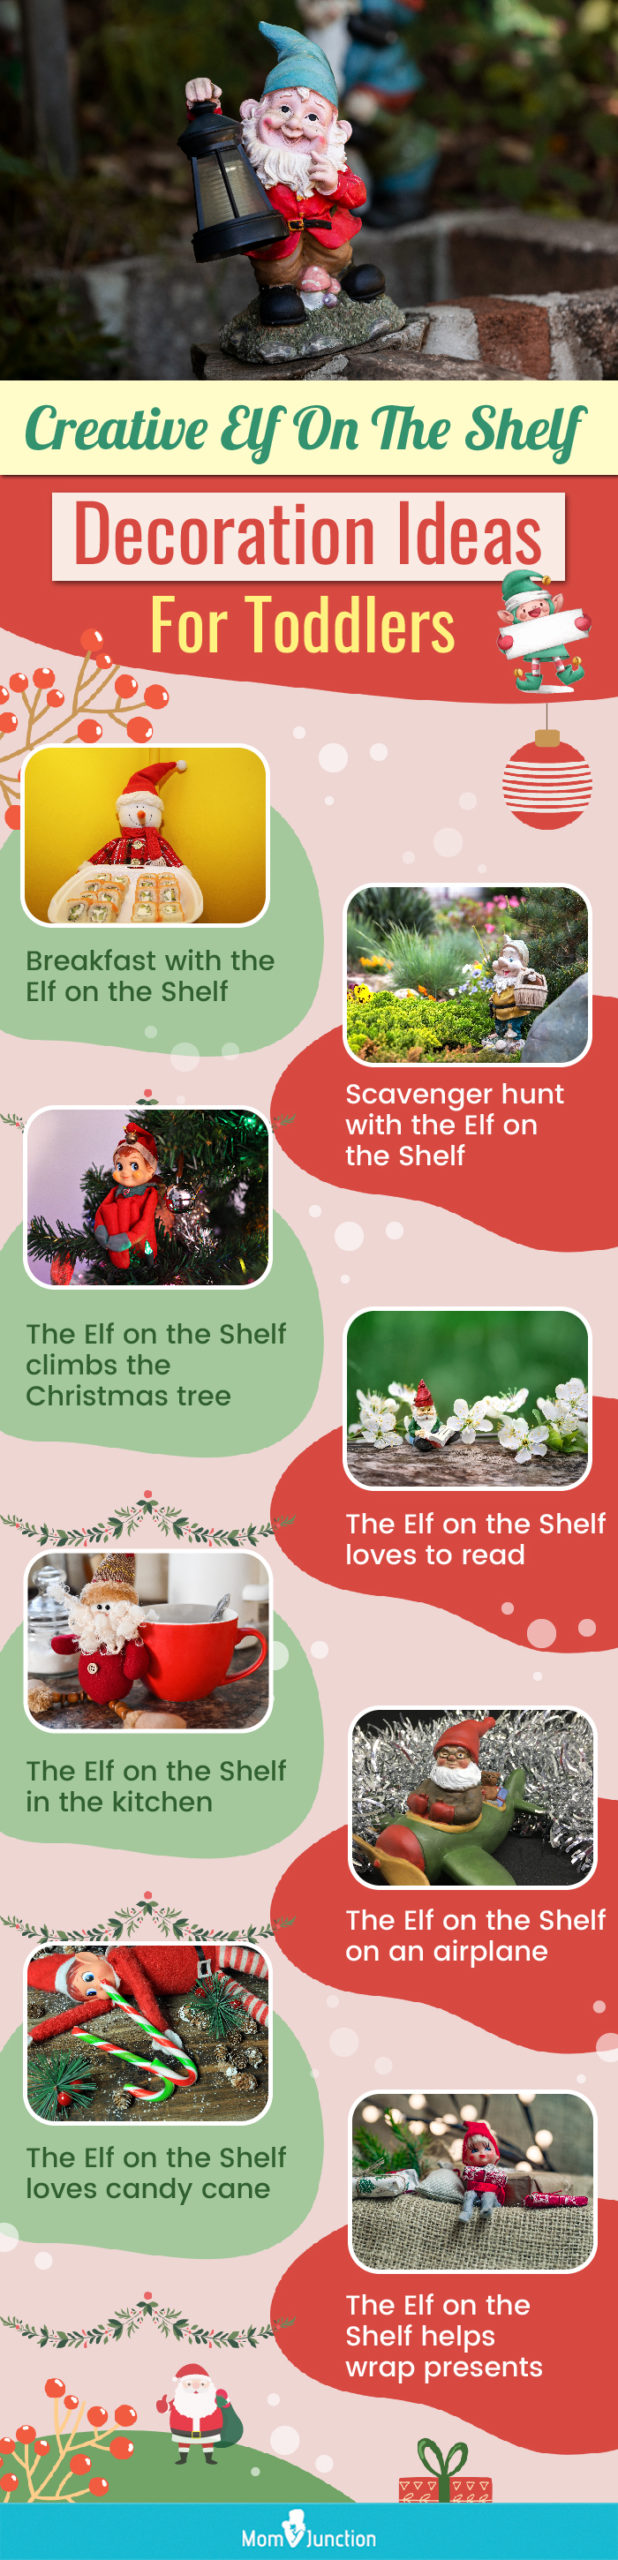 creative elf on the shelf decoration ideas for toddlers (infographic)